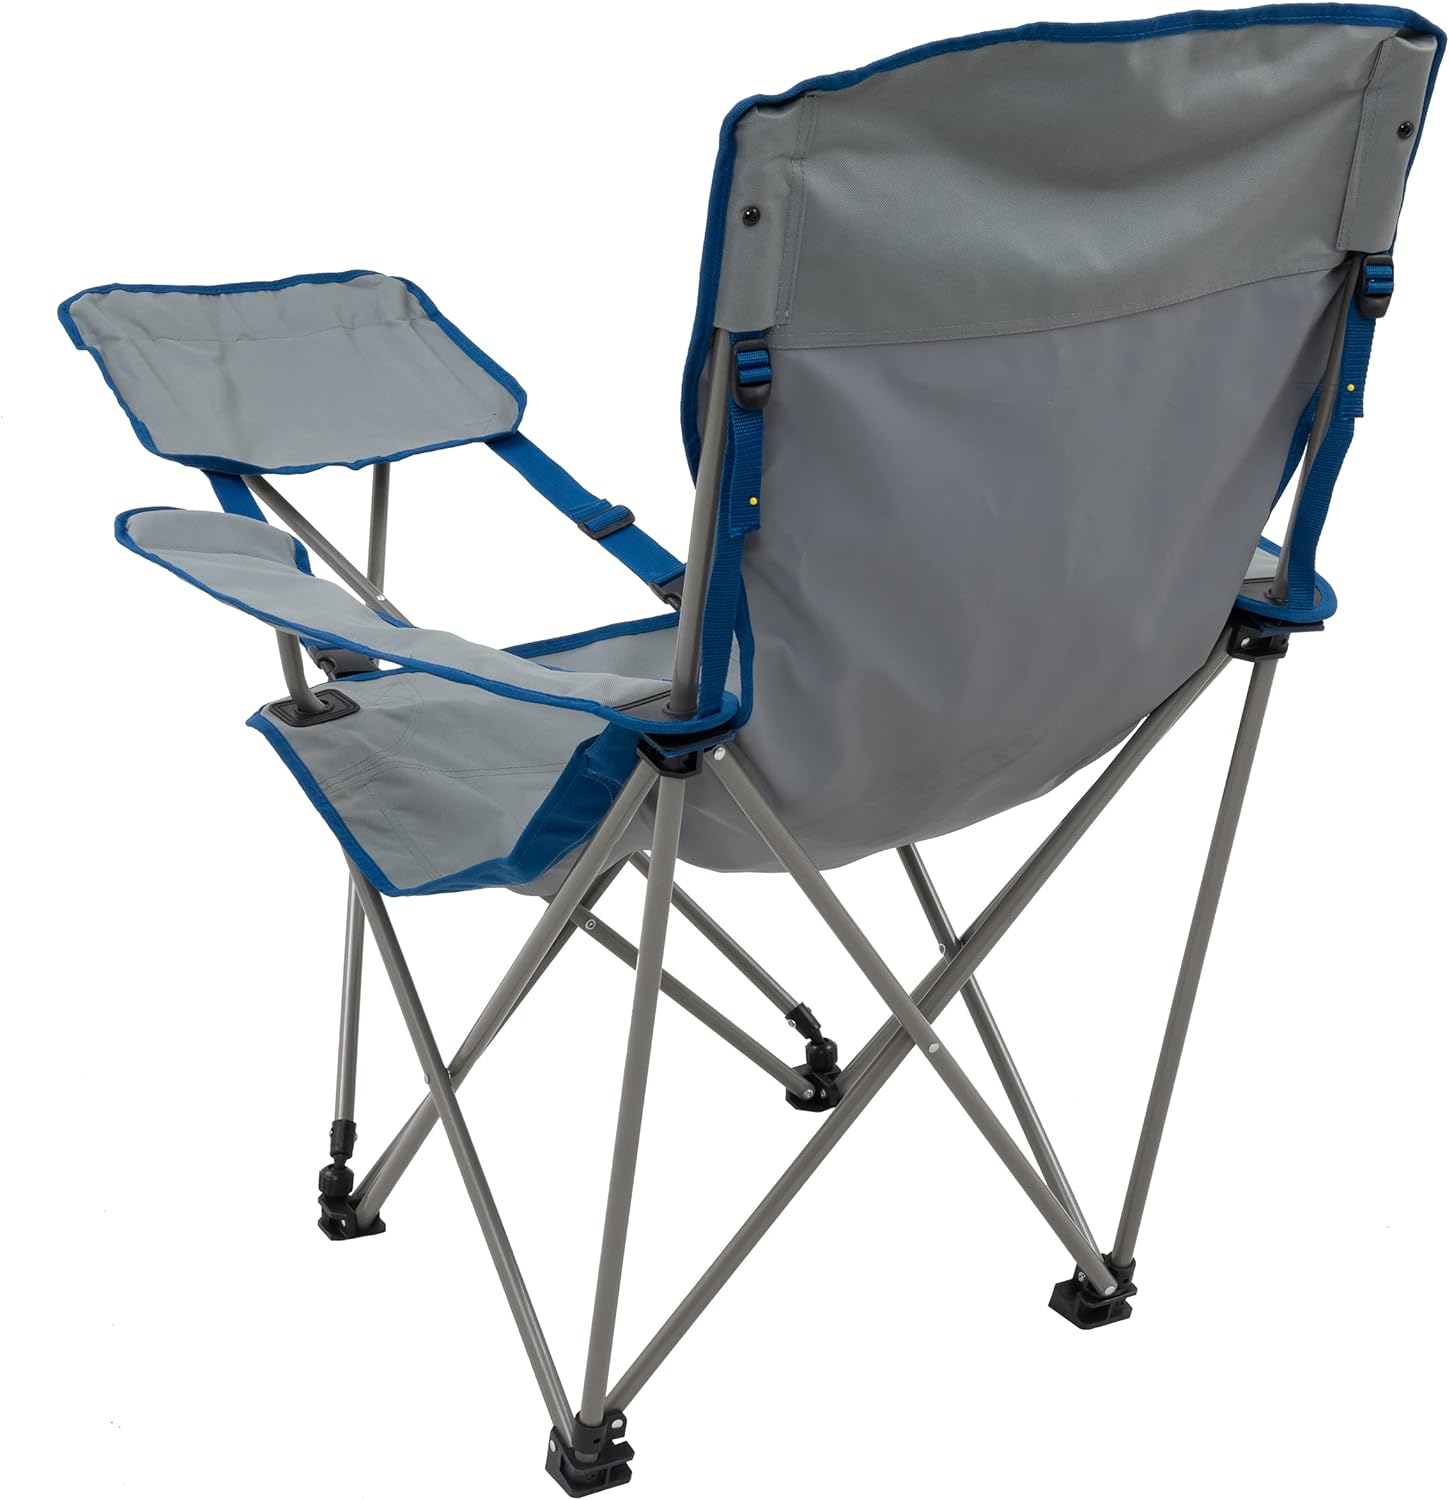 ALPS Mountaineering Escape Lounge Camping Chairs for Adults with Footrest and Adjustable Armrests, Sturdy Steel Frame, Compact Foldable Design, and Carry Bag